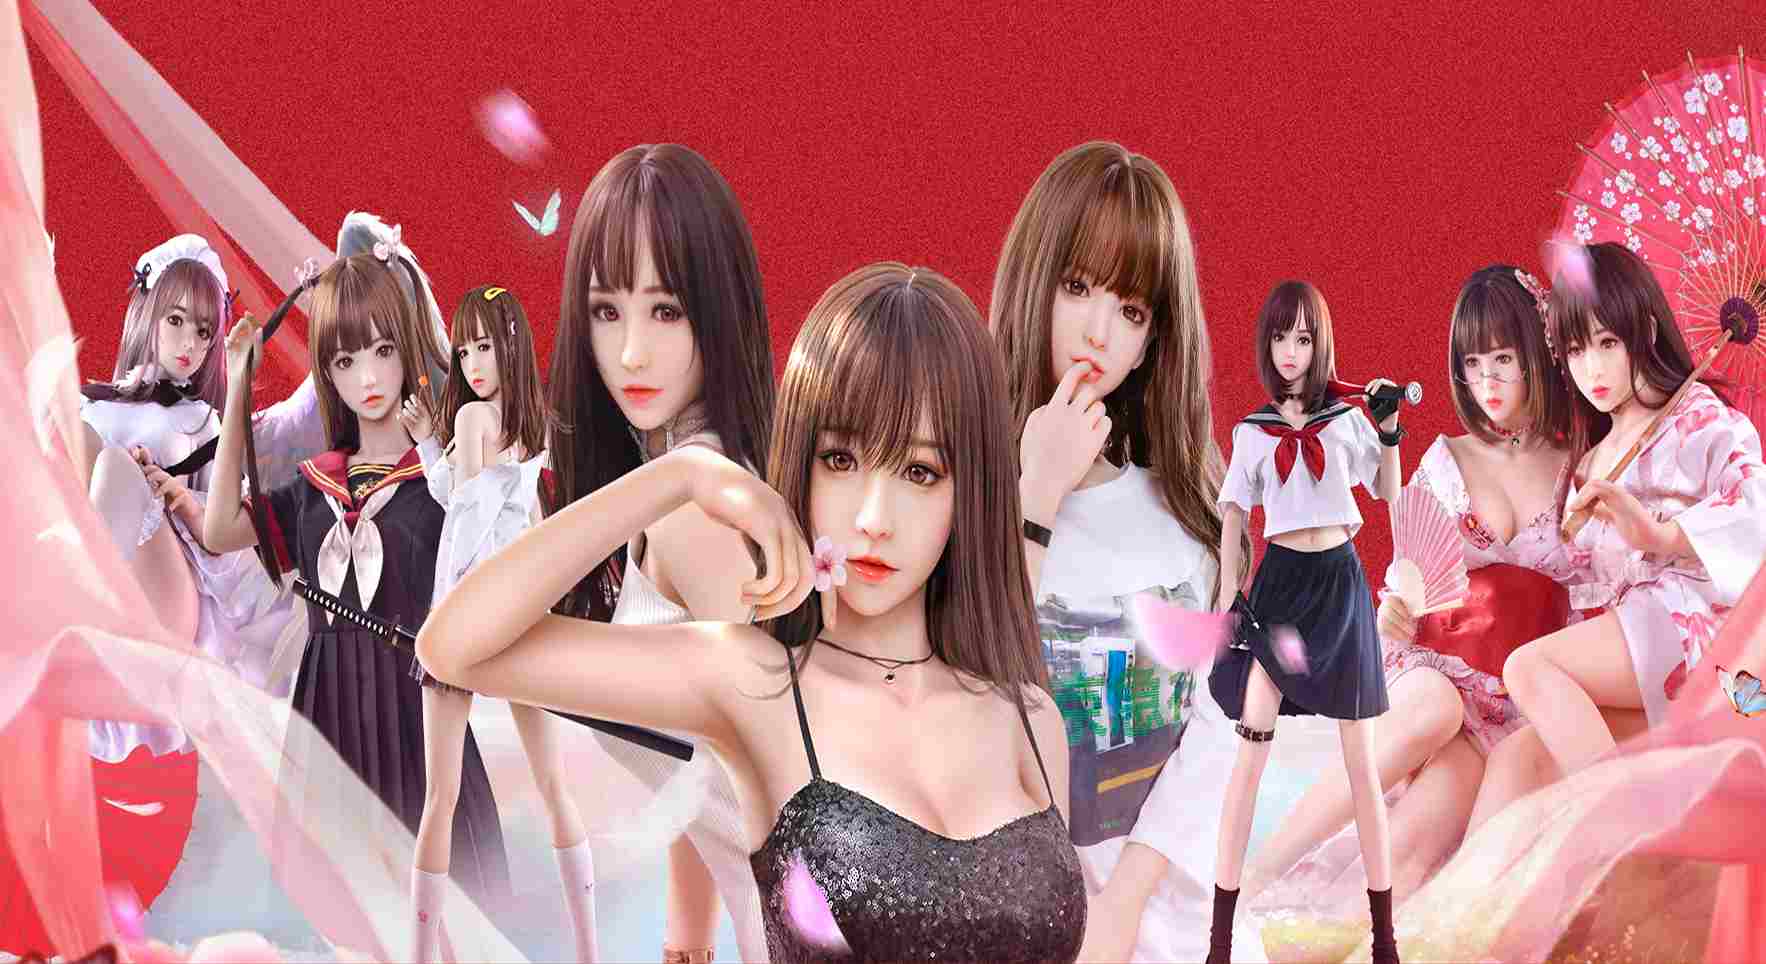 AFFORDABLE ALIEXPRESS STORE FOR SEX DOLL